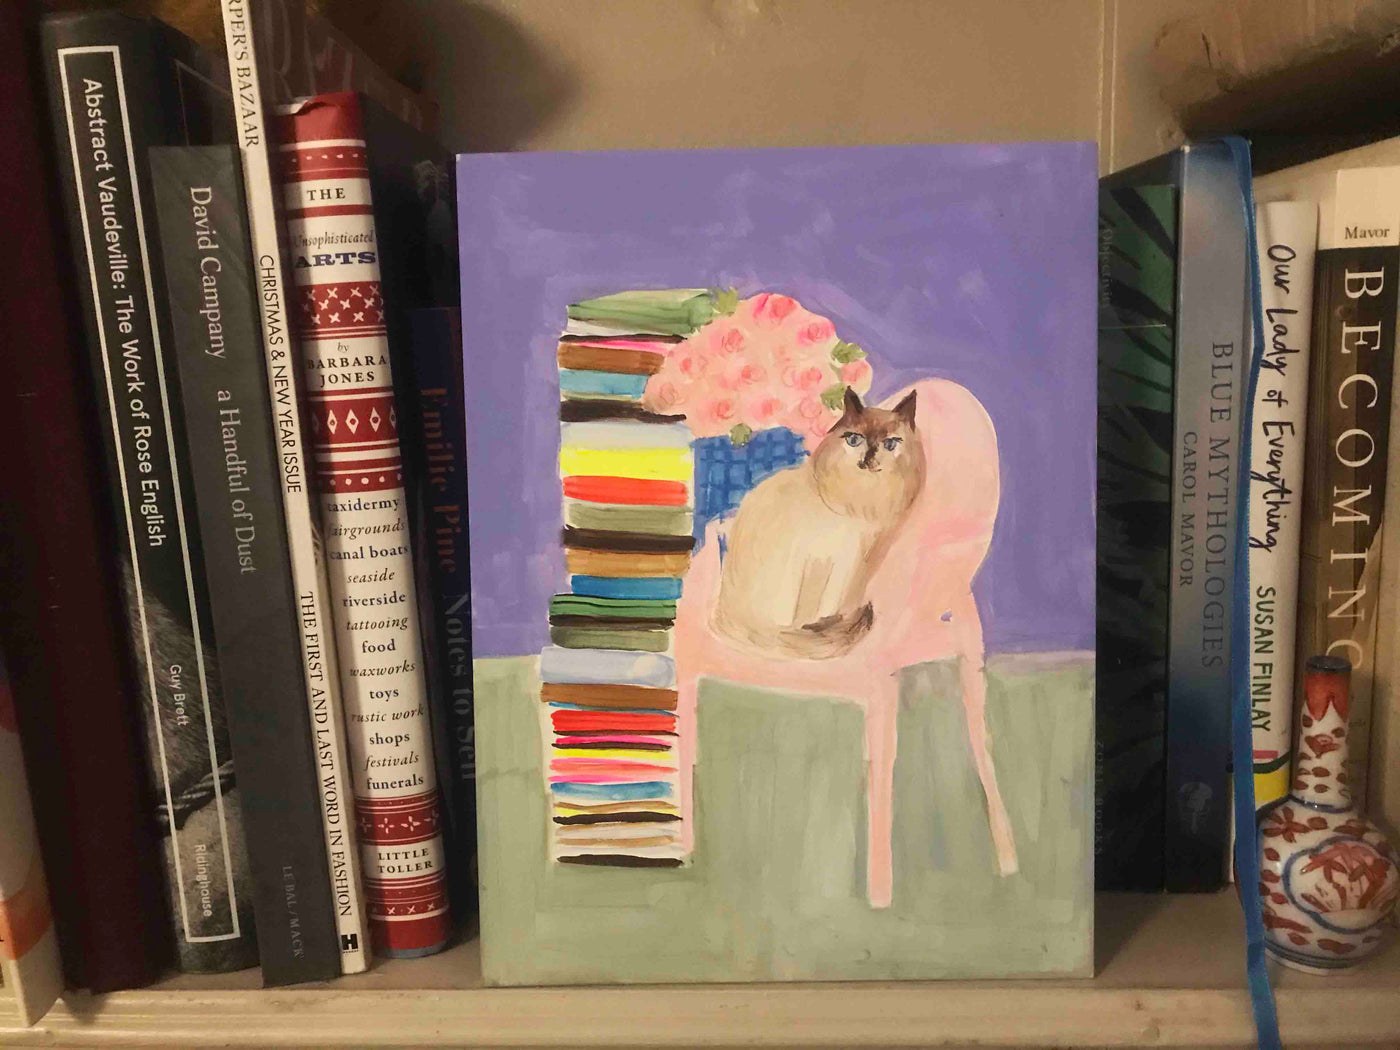 Ragdoll with Peonies & Books on Phillipe Starck Ghost Chair Original Painting by Annabel Pearl